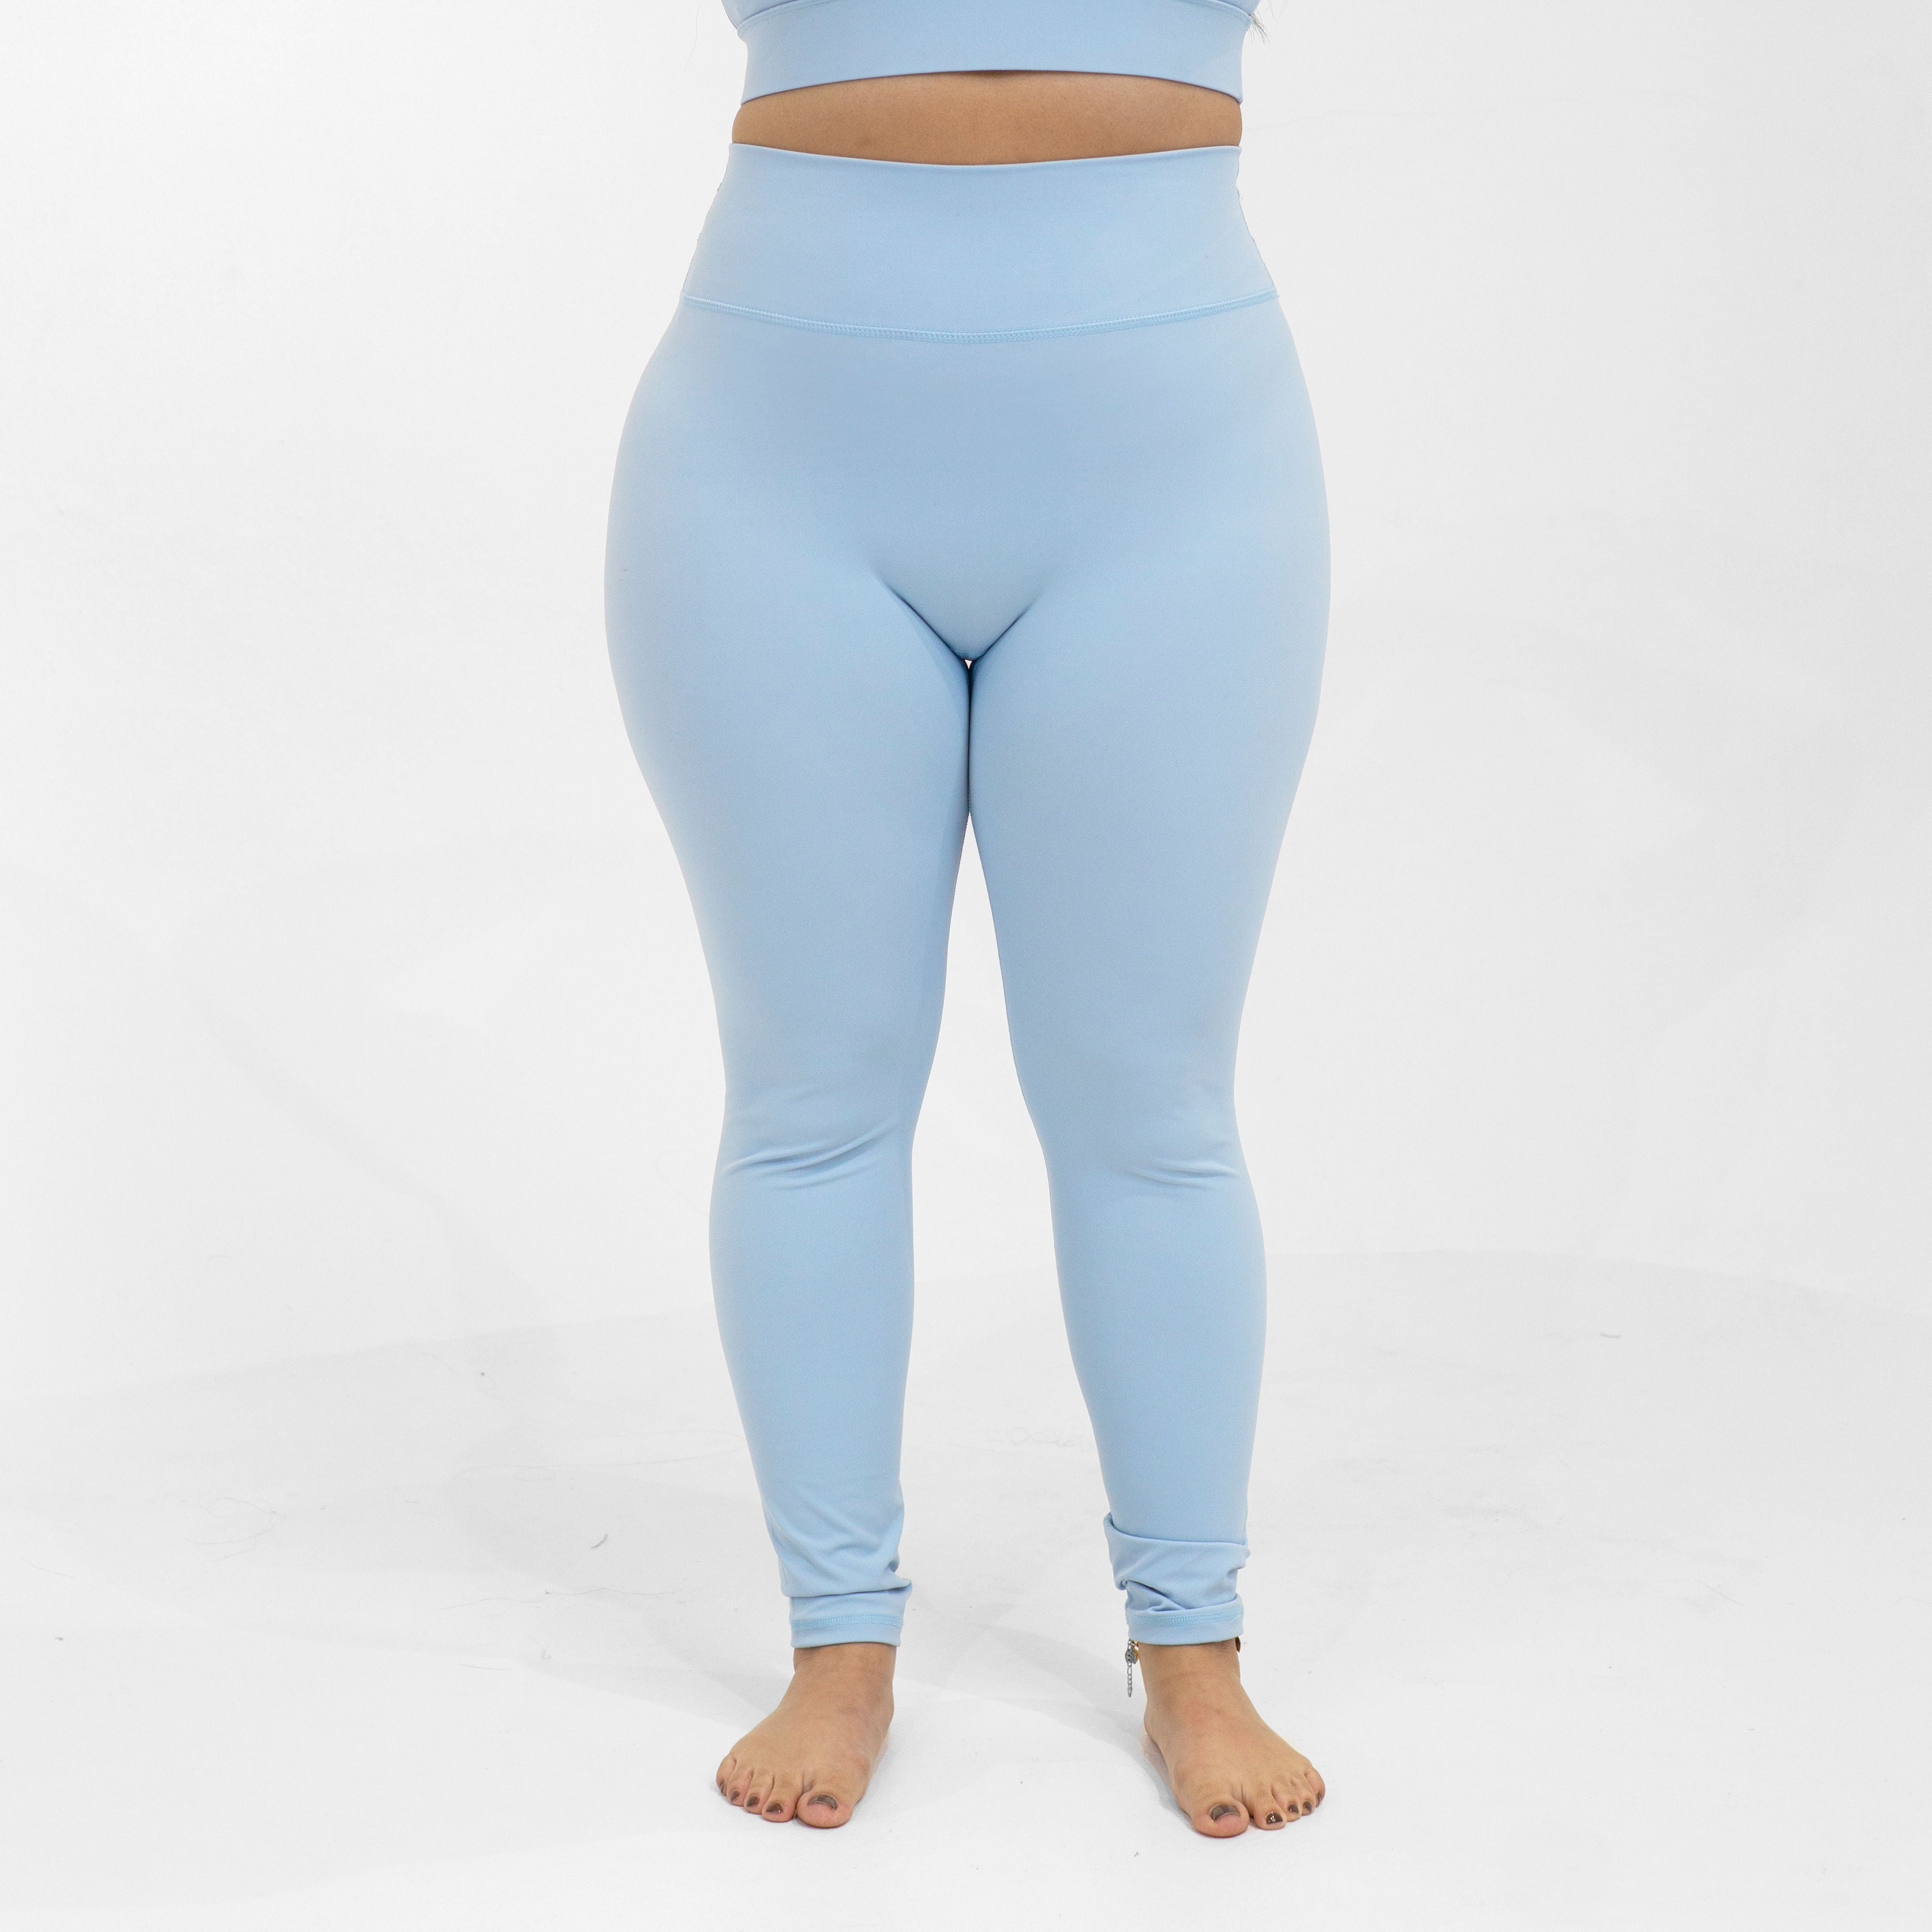 True Fit Leggings for Sale  Buy Online at FIT & FEARLESS